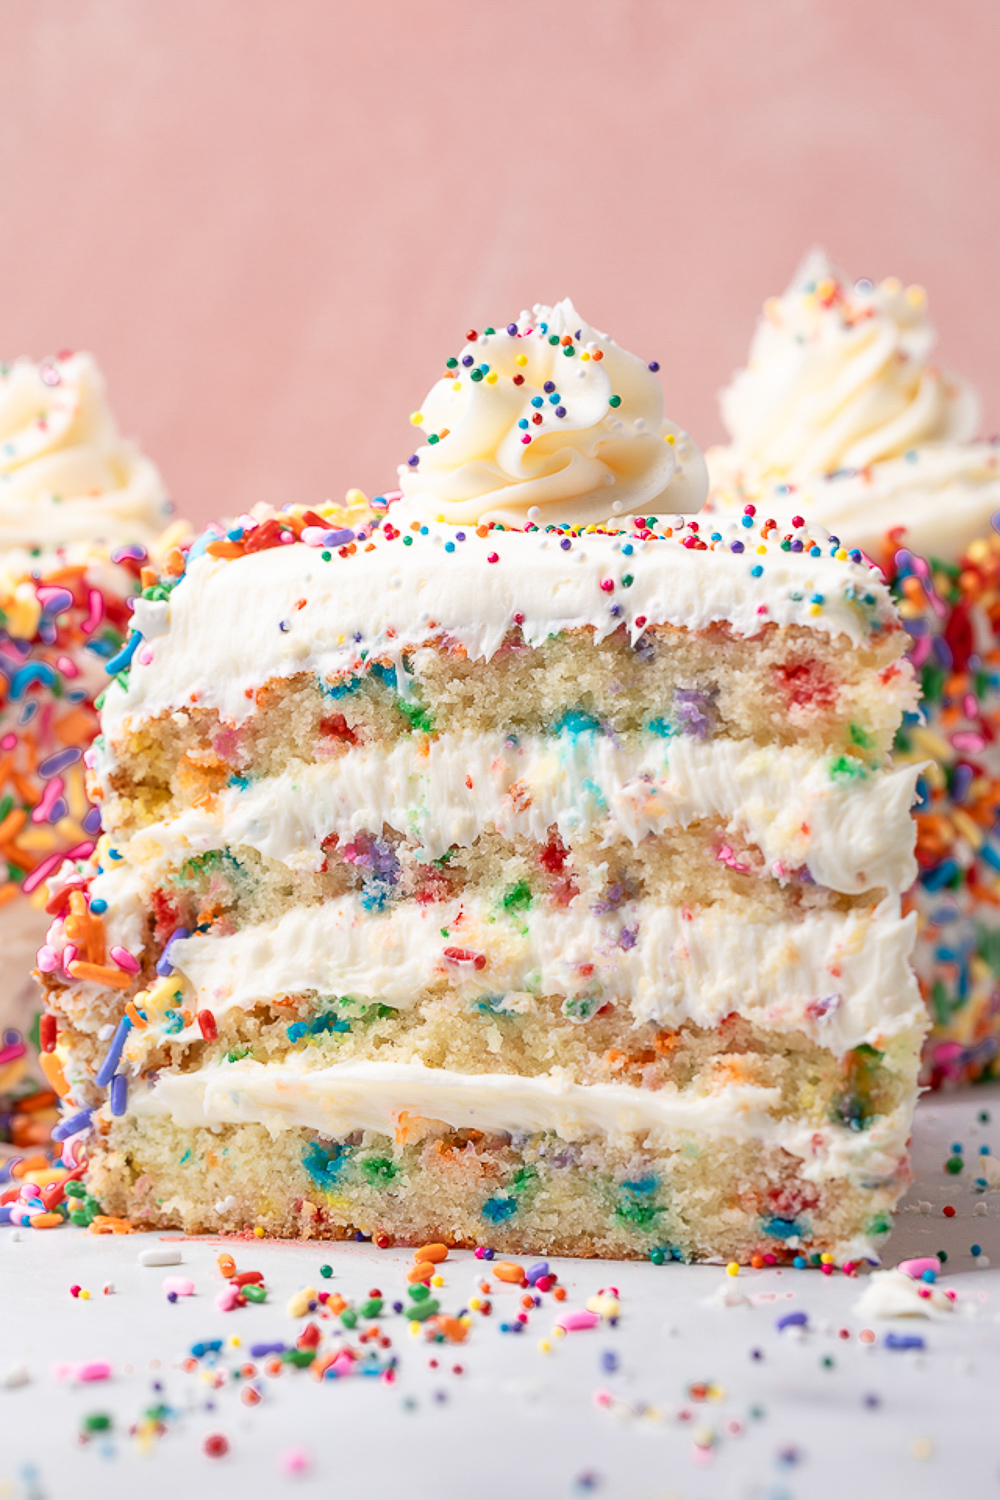 17 absolutely stunning birthday cake recipes that are perfect for almost any occasion!